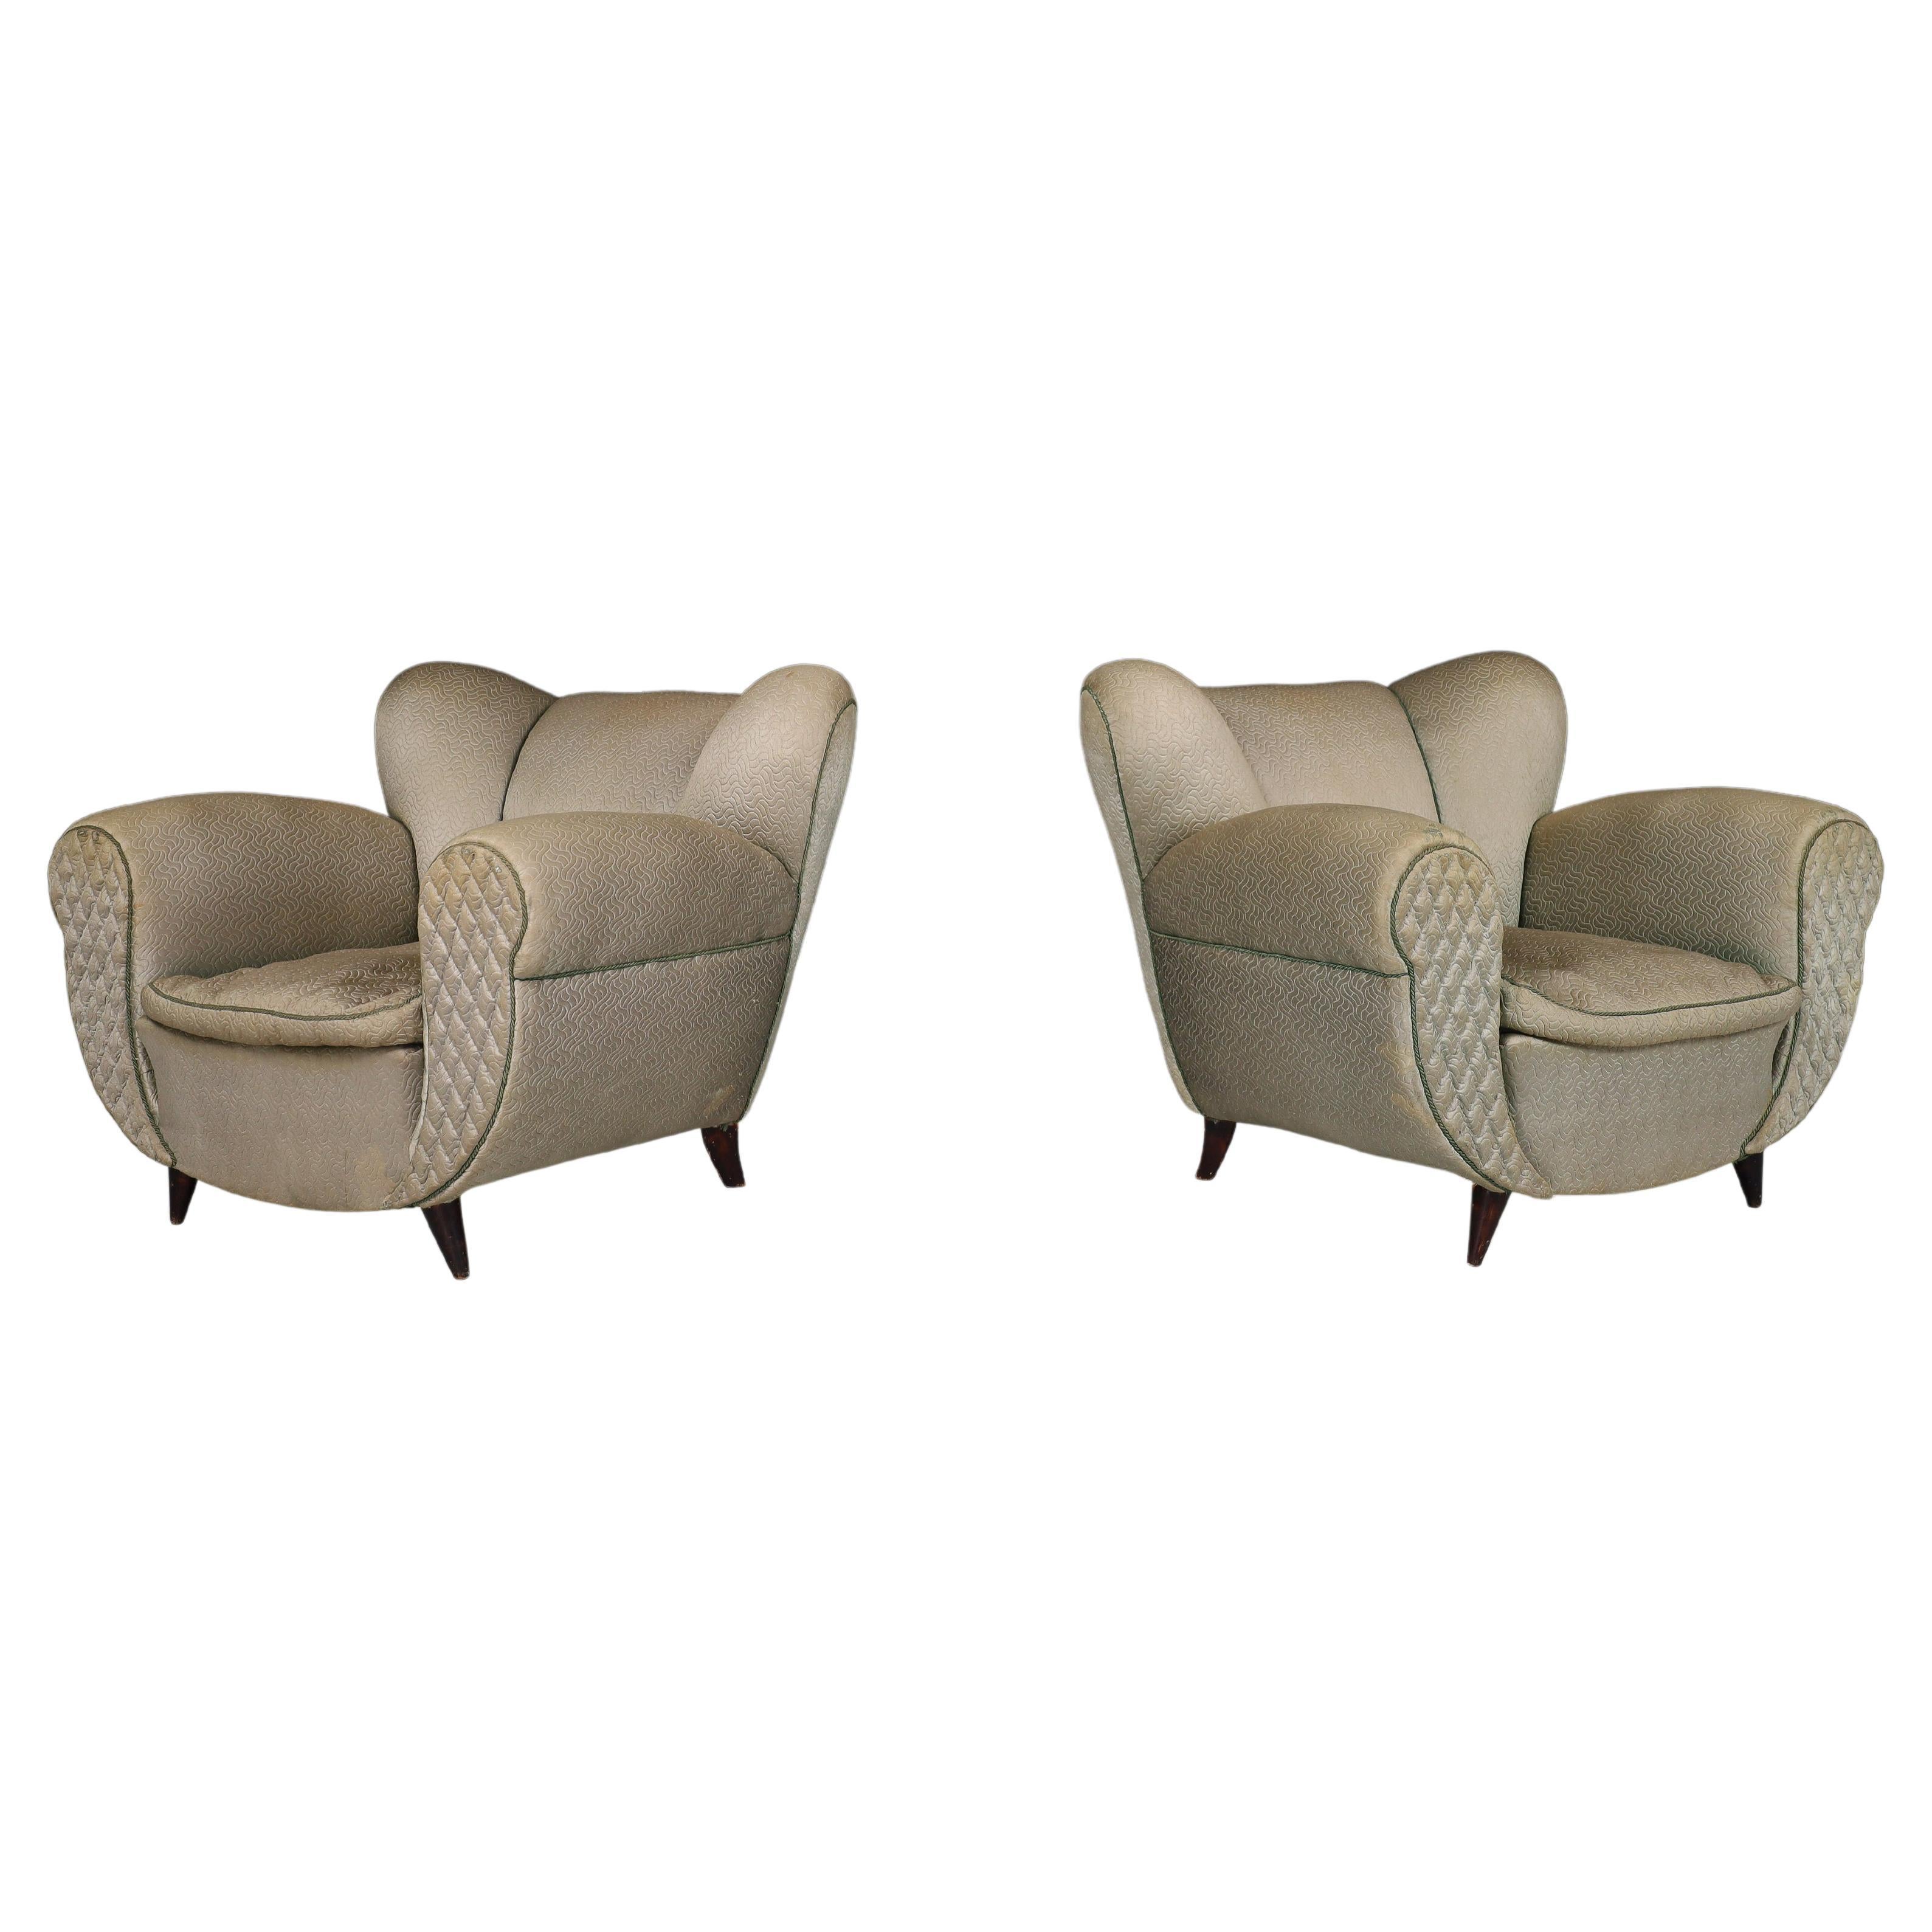 Uglielmo Ulrich Art Deco Lounge Chairs in Original Fabric, Italy 1930s For Sale